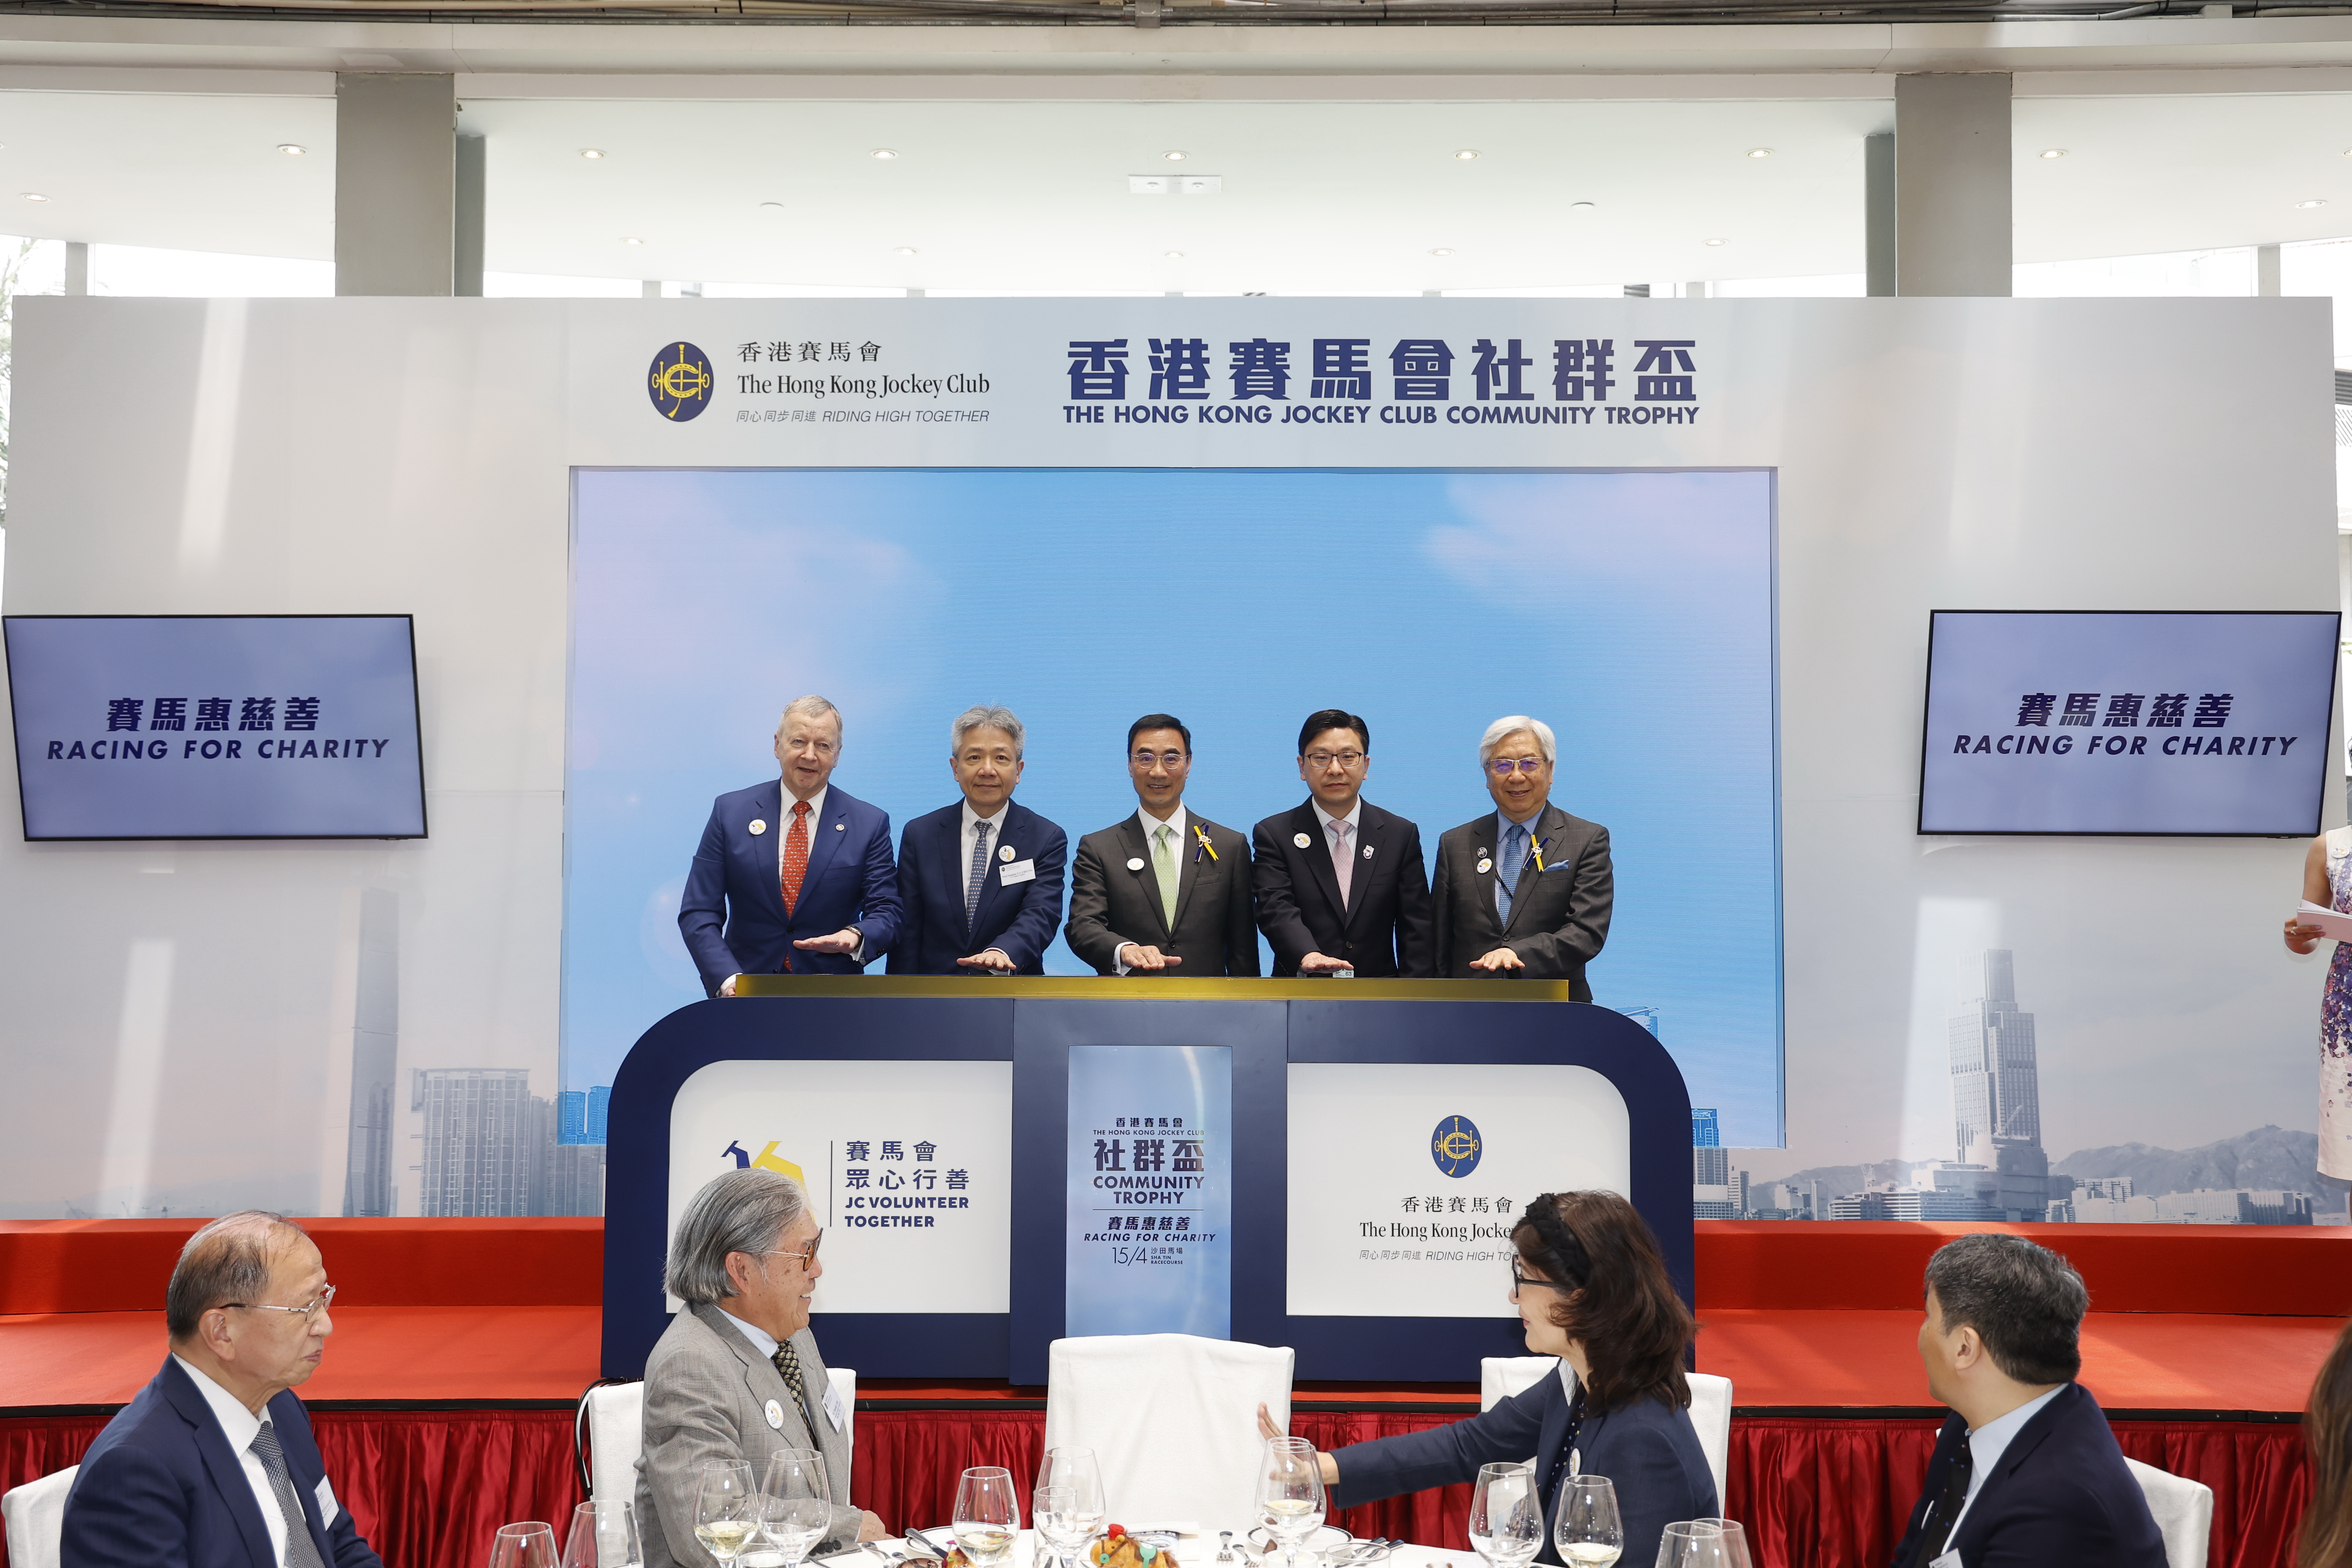 HKSAR Government Secretary for Labour and Welfare Chris Sun (2nd right), Club Chairman Michael Lee (centre), Deputy Chairman Dr Eric Li (1st right), Chief Executive Officer Winfried Engelbrecht-Bresges (1st left) and JC VOLUNTEER TOGETHER Advisory Committee Convenor Professor Stephen Cheung (2nd left) officiate at the project announcement ceremony.